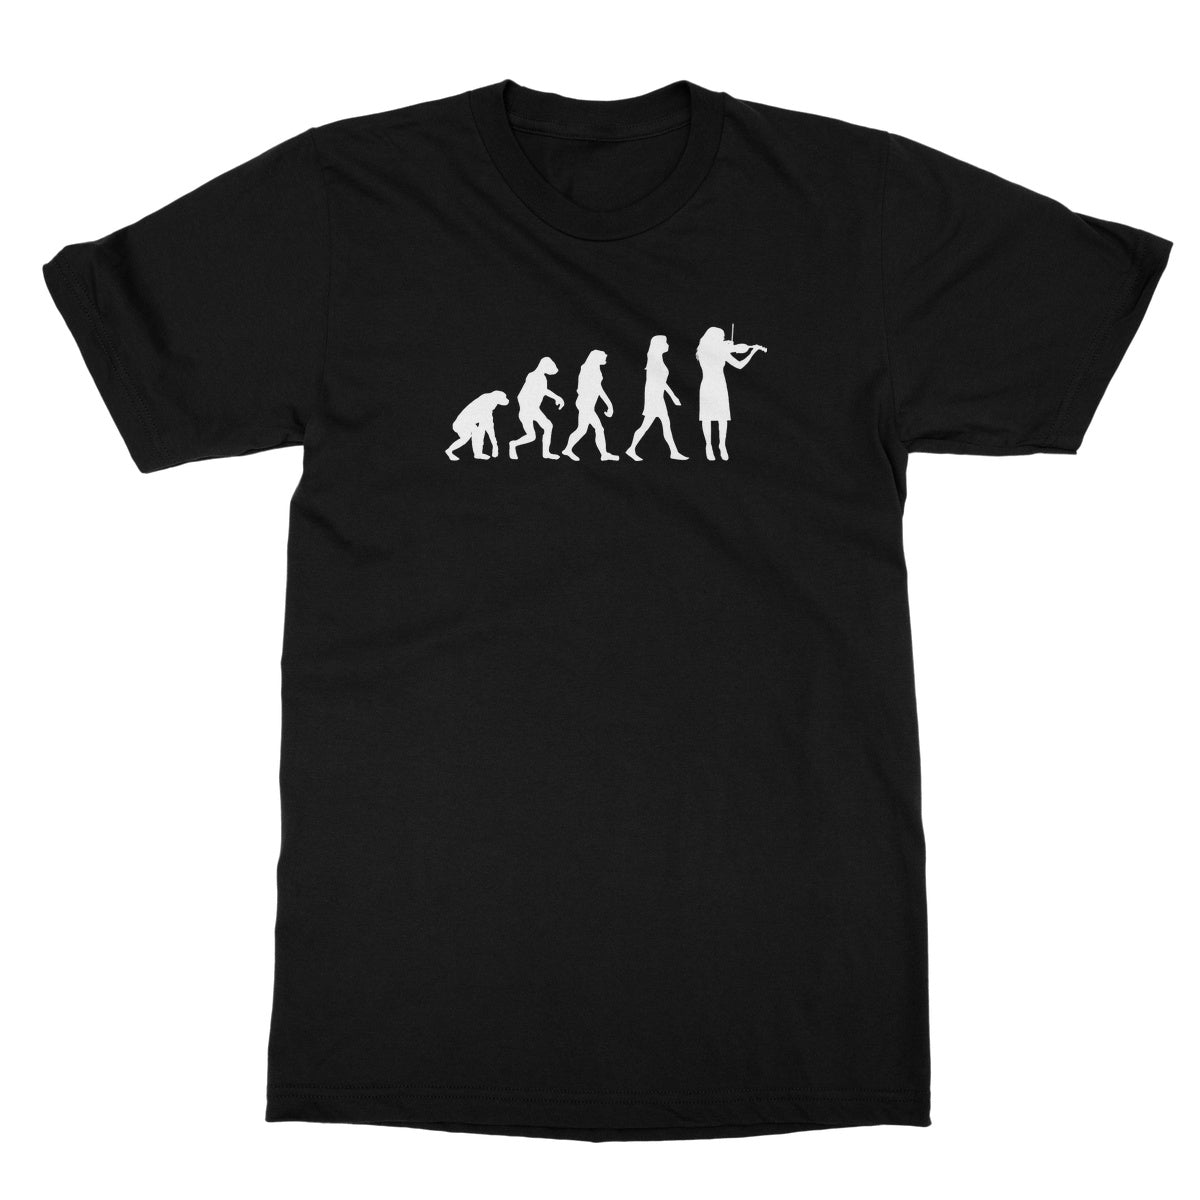 Evolution of Female Fiddle Players T-Shirt